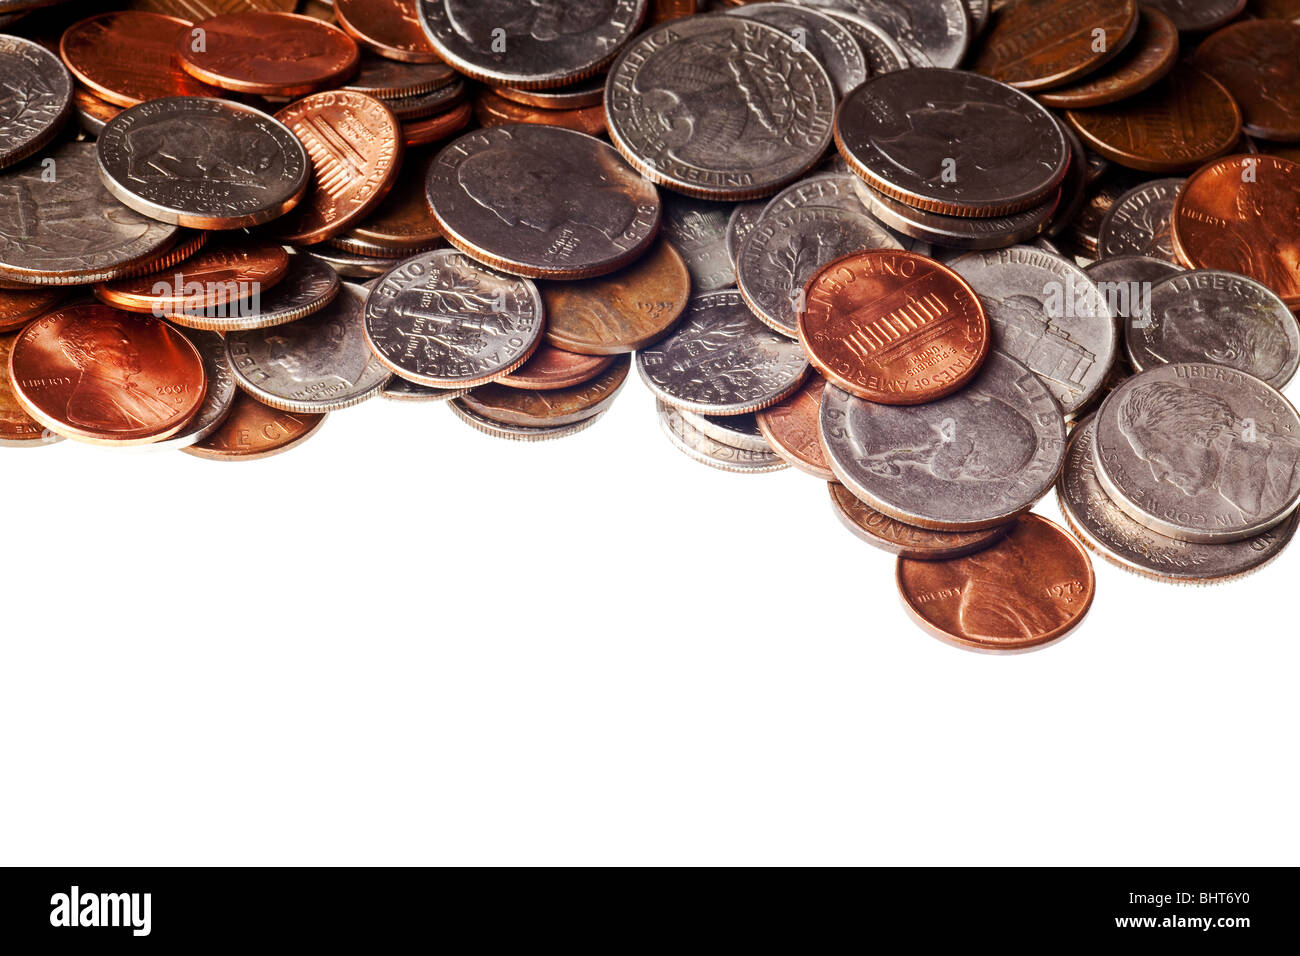 pennies, nickles, dimes, and quarters macro background Stock Photo